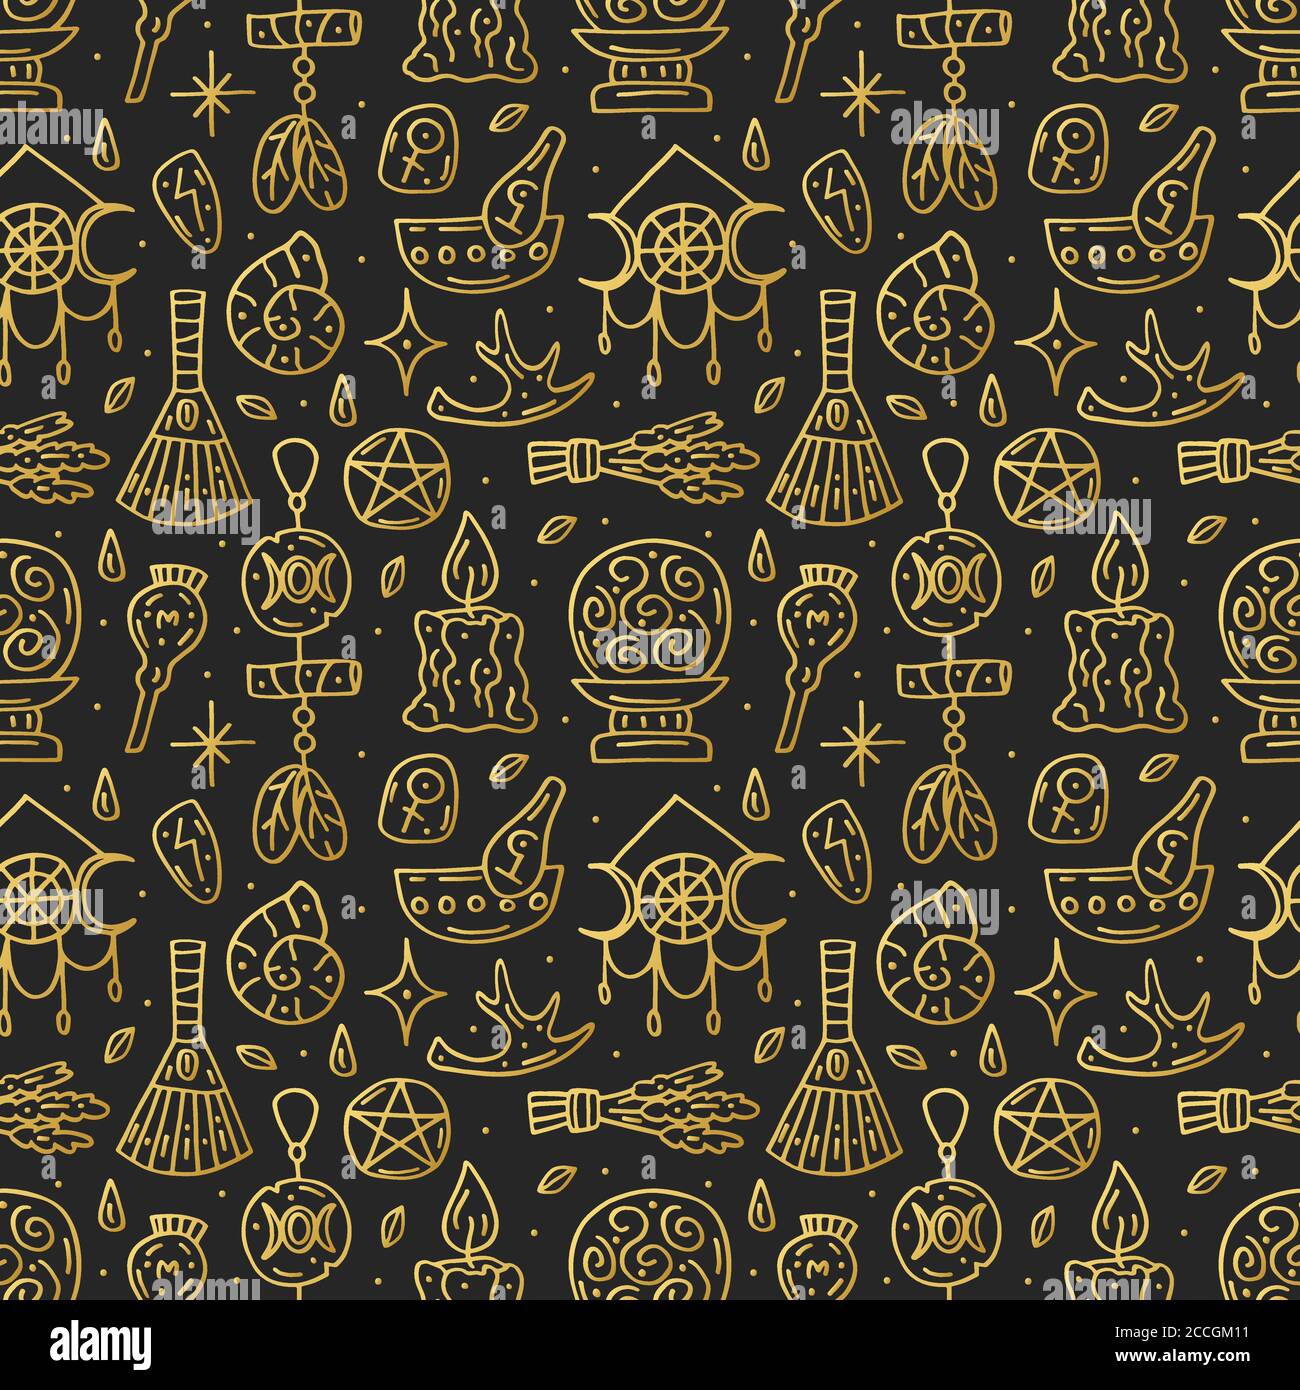 Witchcraft cute vector doodle hand drawn seamless pattern, background, texture. Isolated on dark background. Different magic tools, equipment. Alchemi Stock Vector